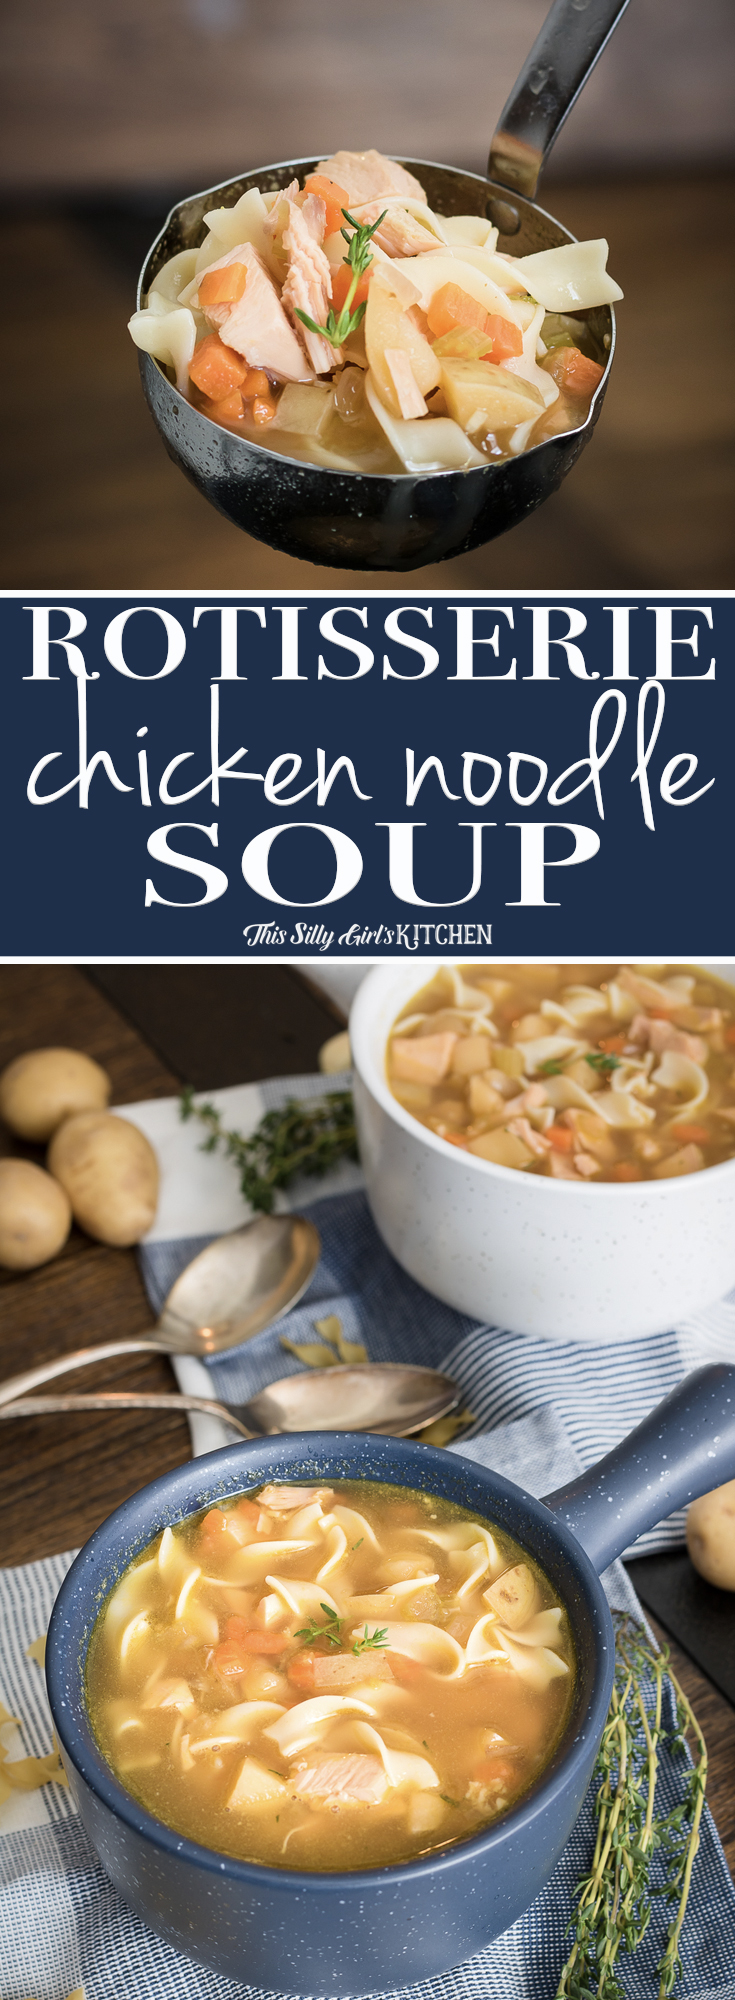 Rotisserie Chicken Noodle Soup, ready in 30 minutes and bursting with flavor! Recipe from ThisSillyGirlsKitchen.com #chickennoodlesoup #soup #rotisseriechicken